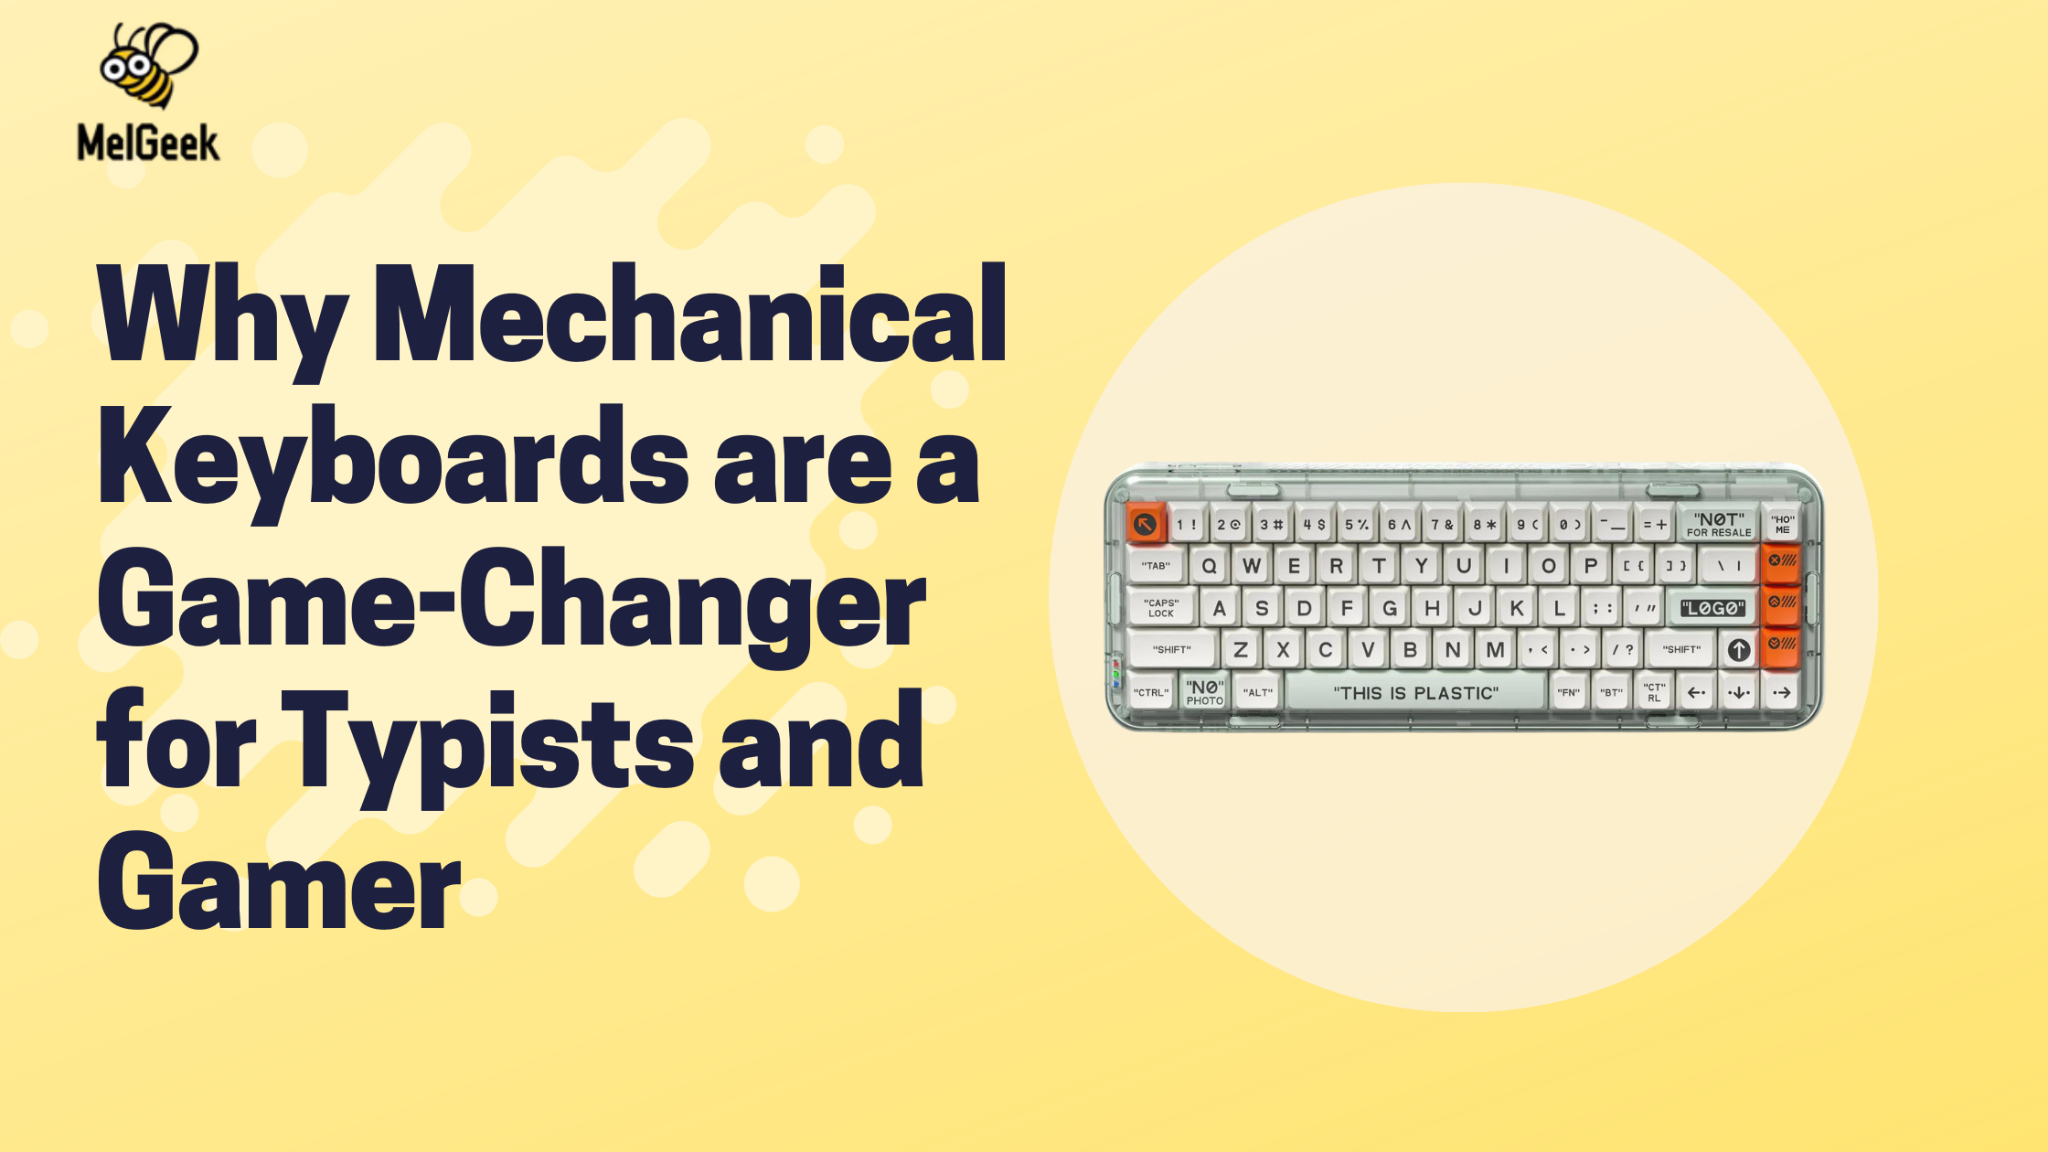 Why Mechanical Keyboards are a Game-Changer for Typists and Gamer